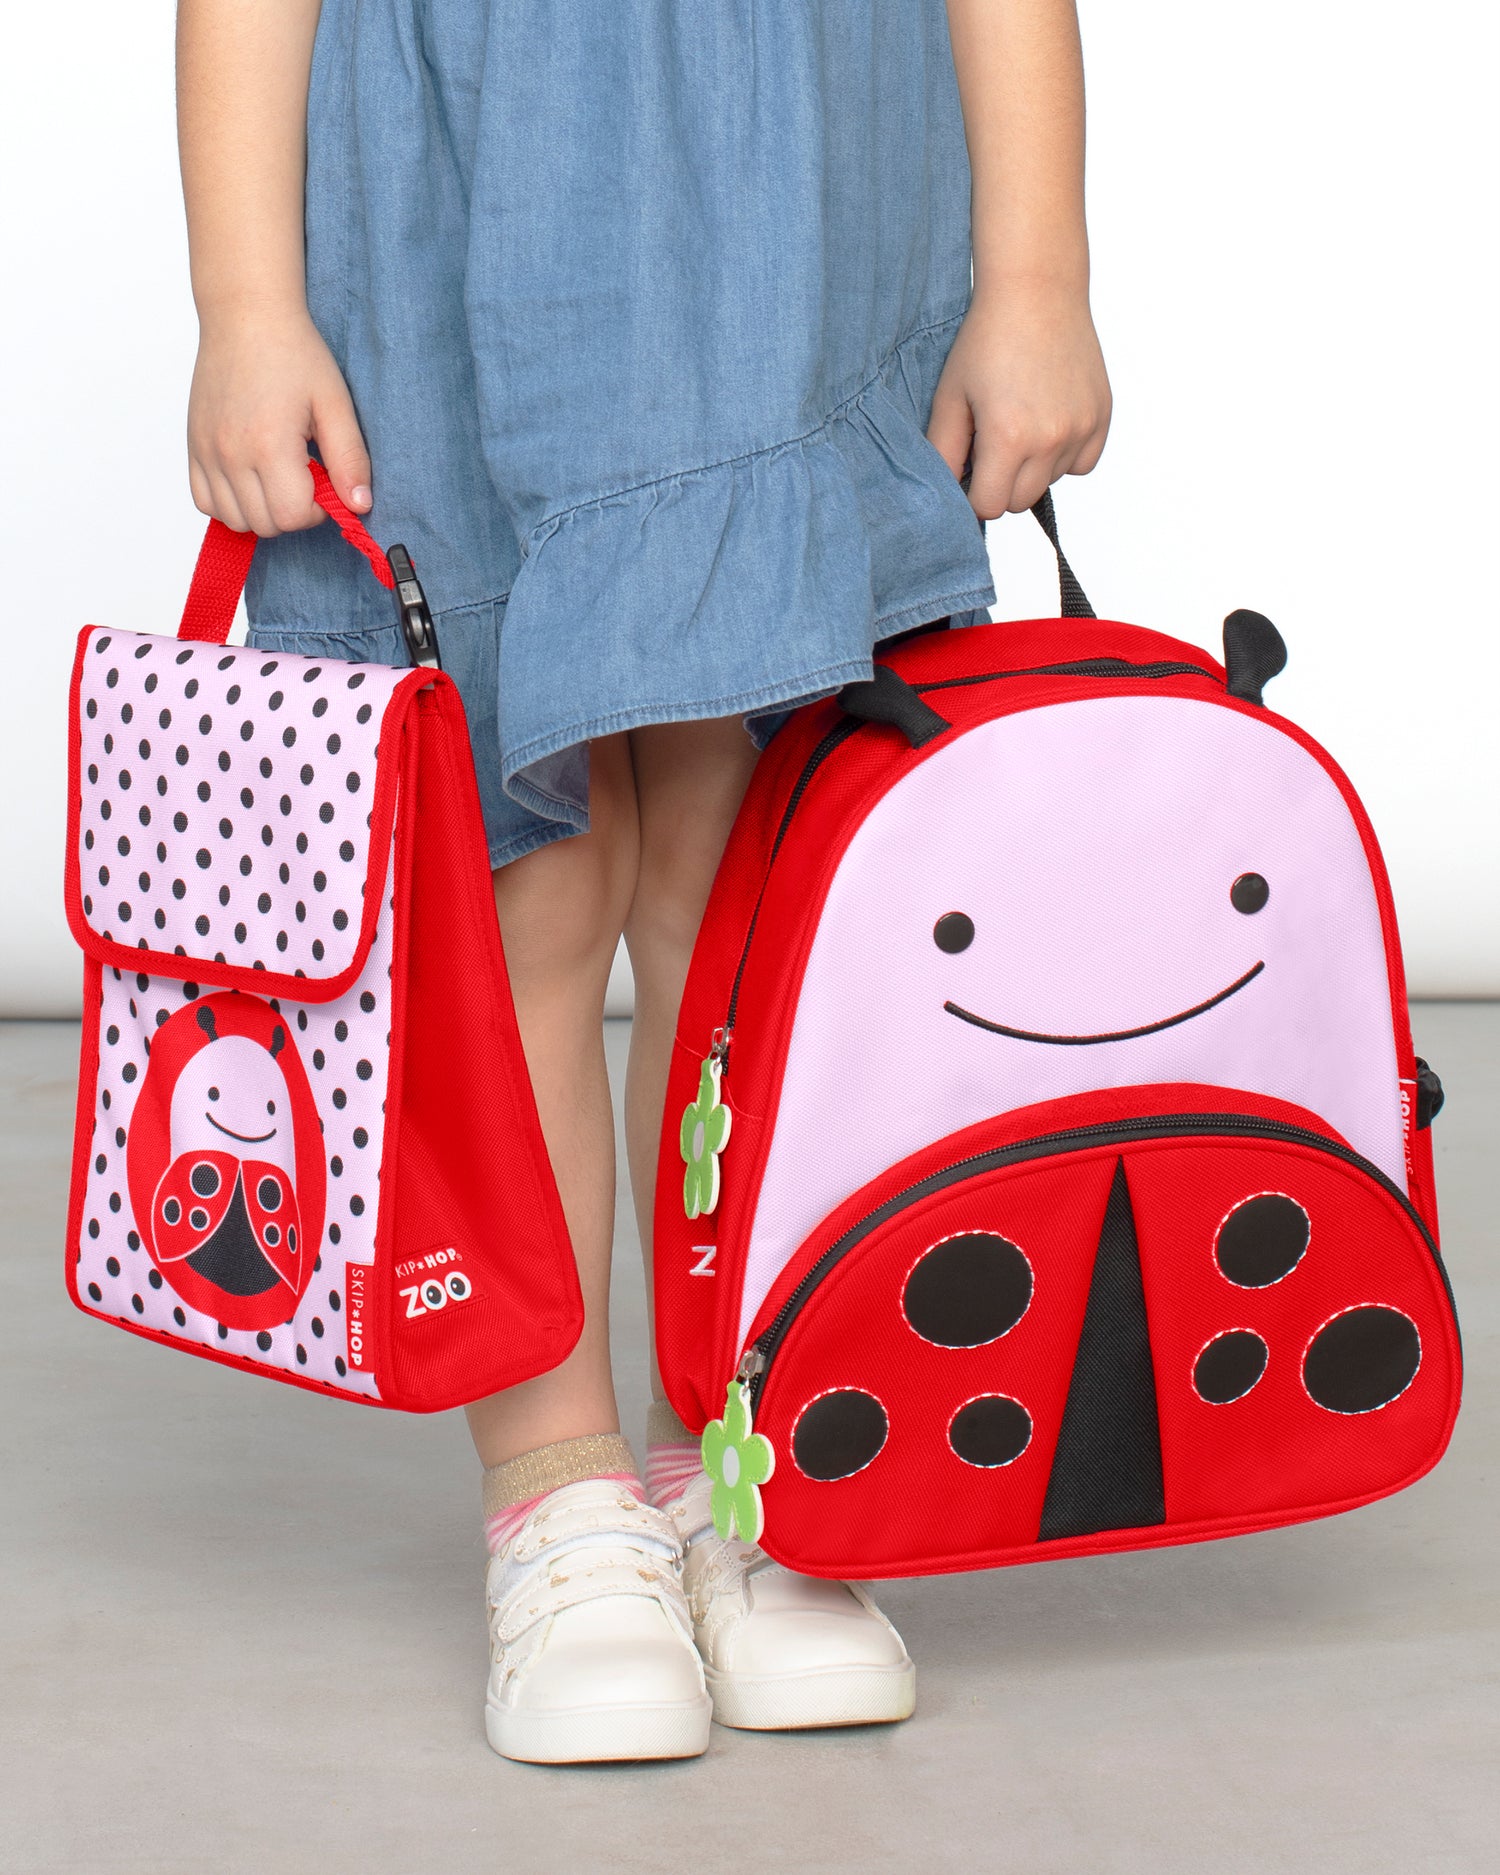 Skip Hop Zoo Lunchie Insulated Lunch Bag, Ladybug 